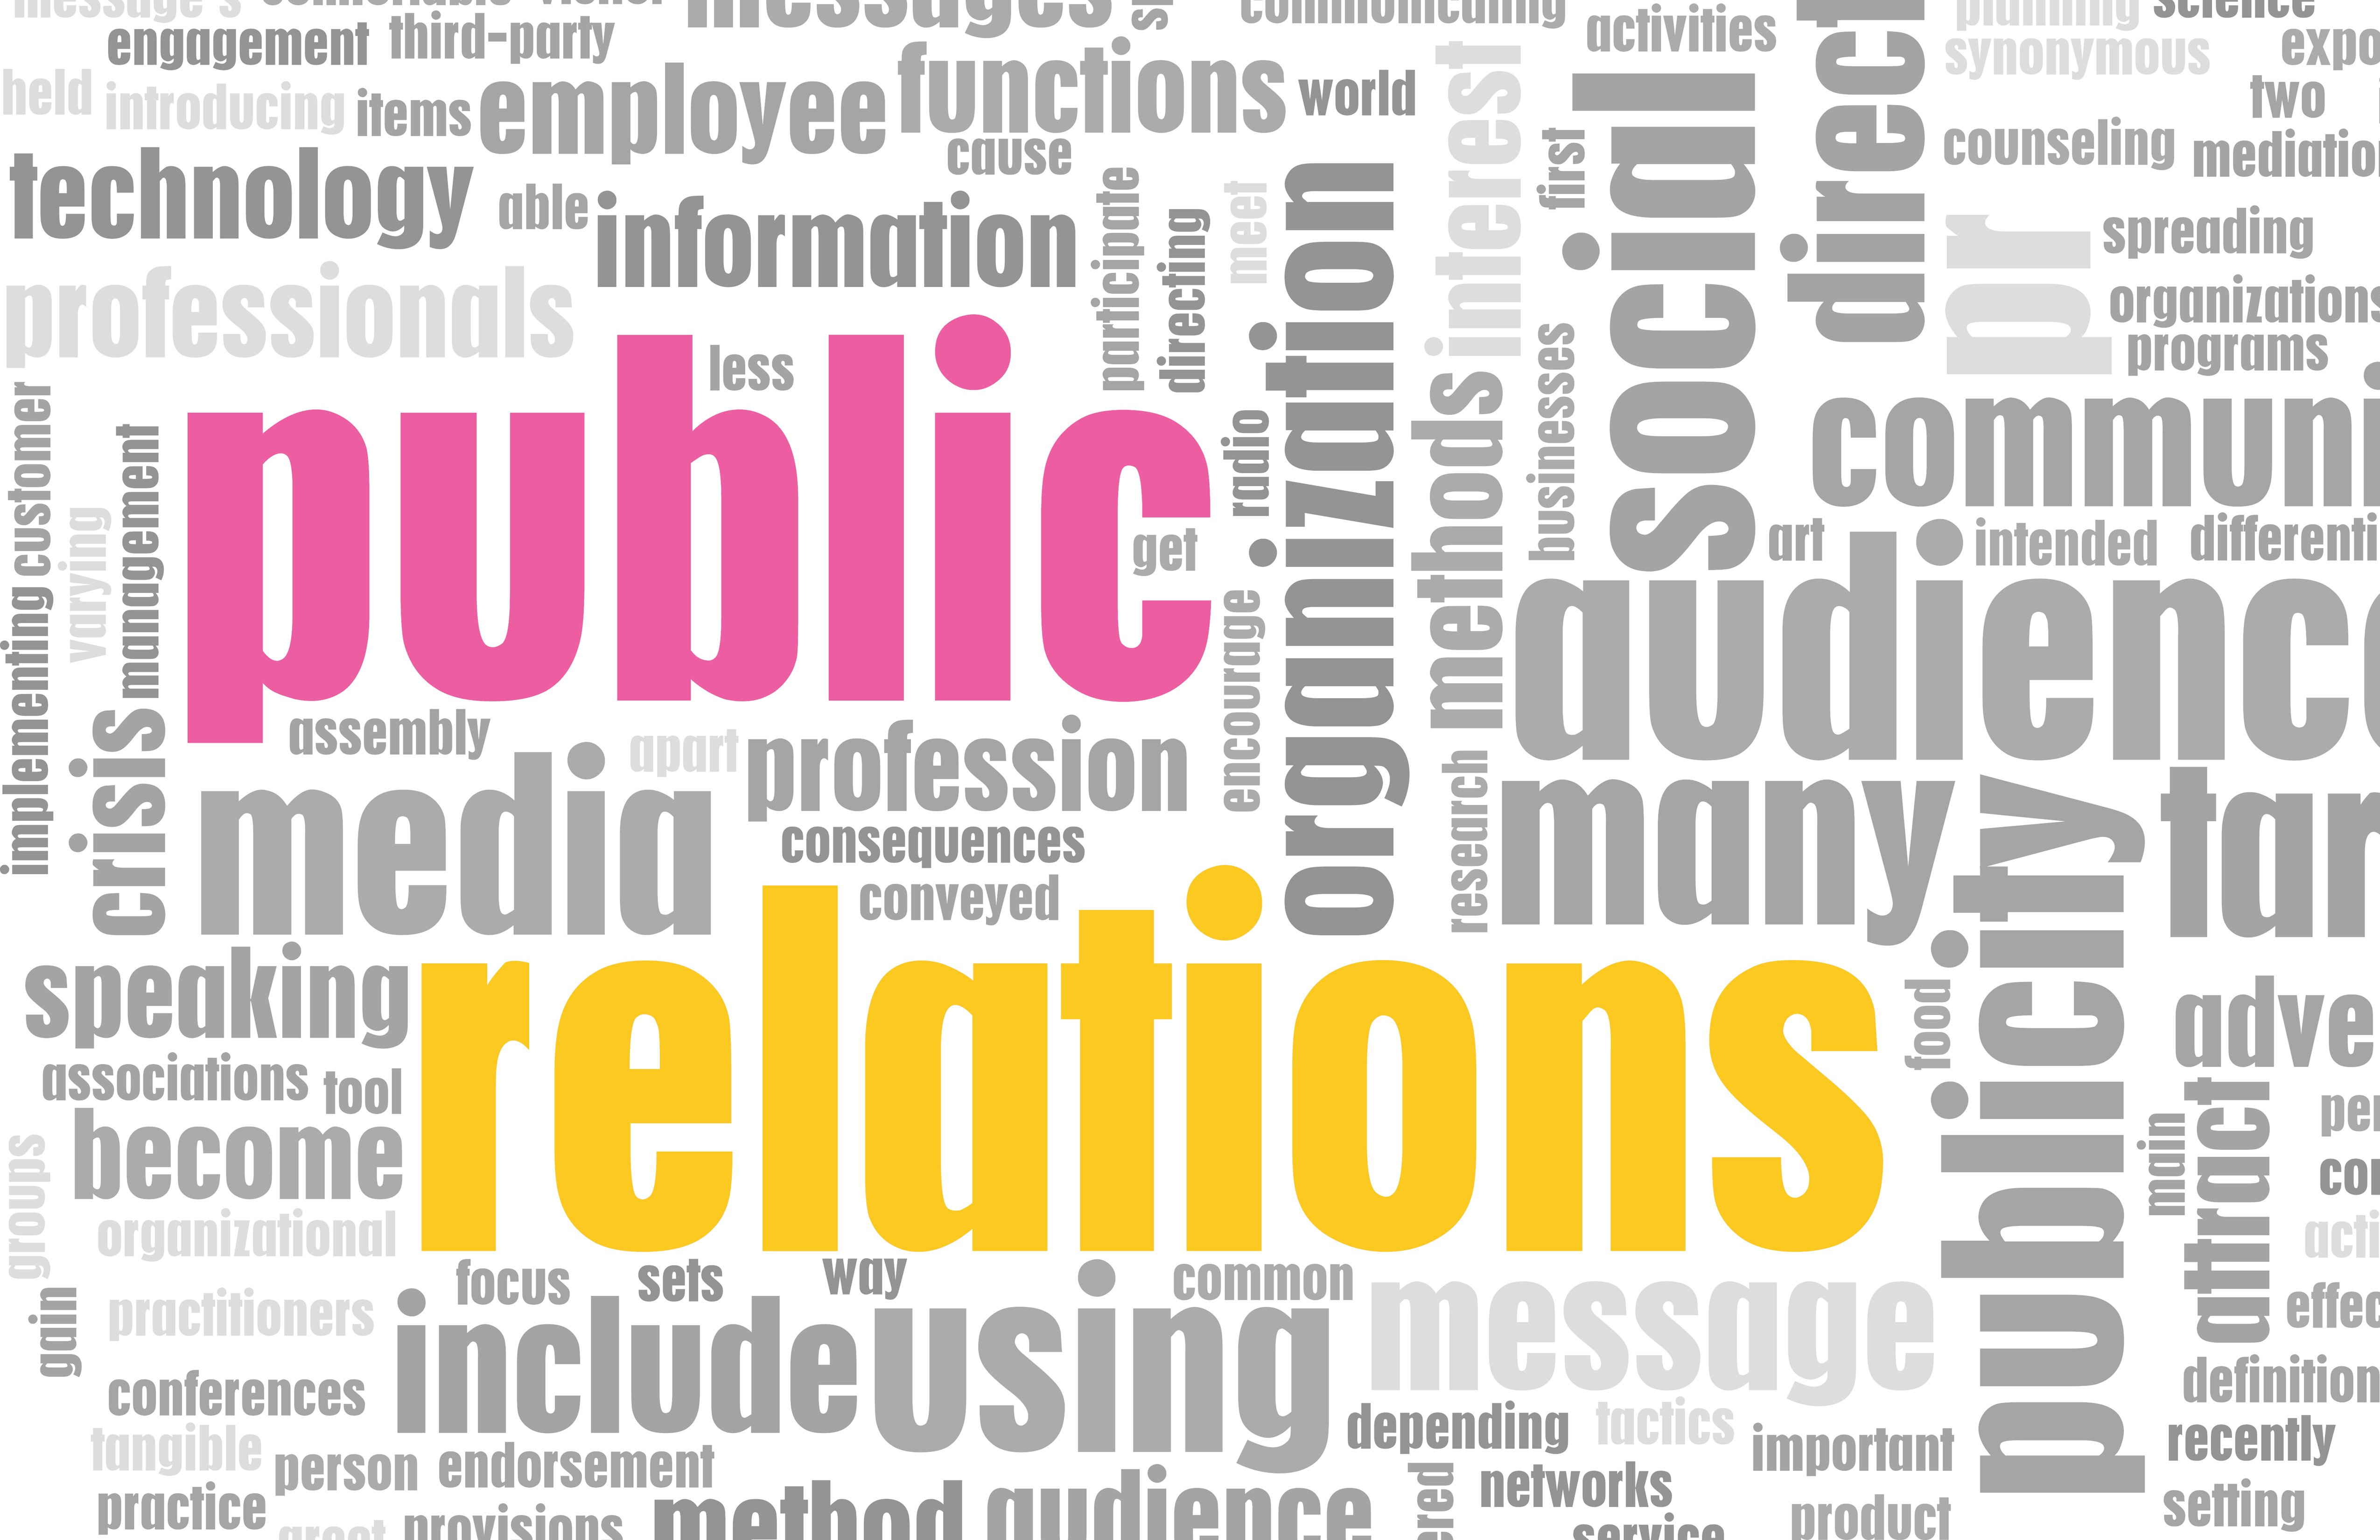 Public Relations Strategy for Your Small Business’ Product Launch